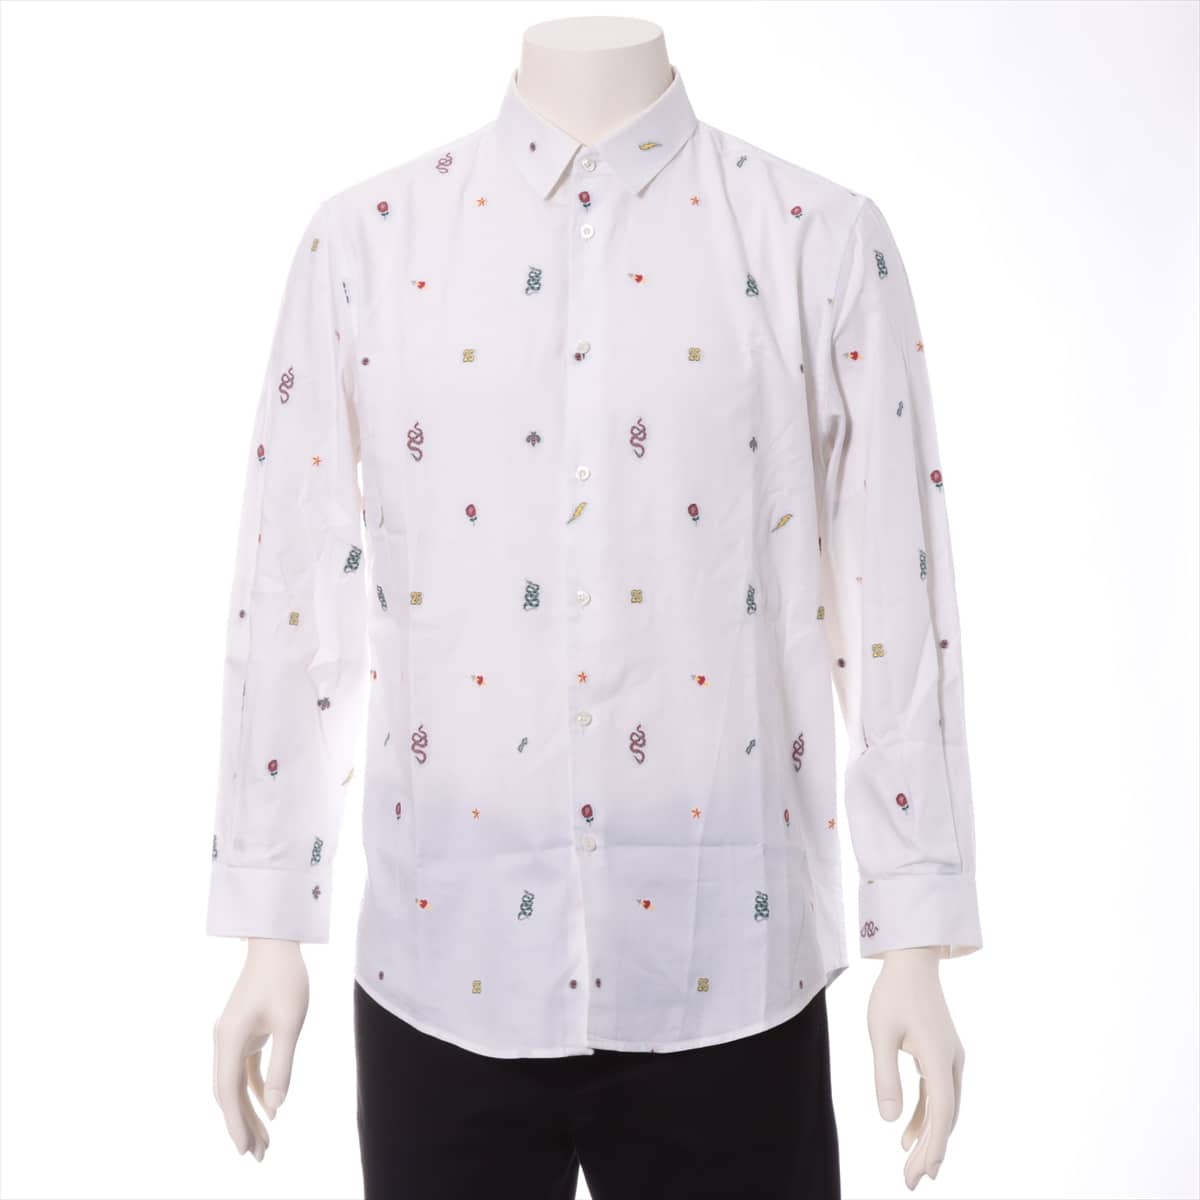 Gucci 18 years Cotton Shirt 40 Men's White  Total handle There is damage to the neck